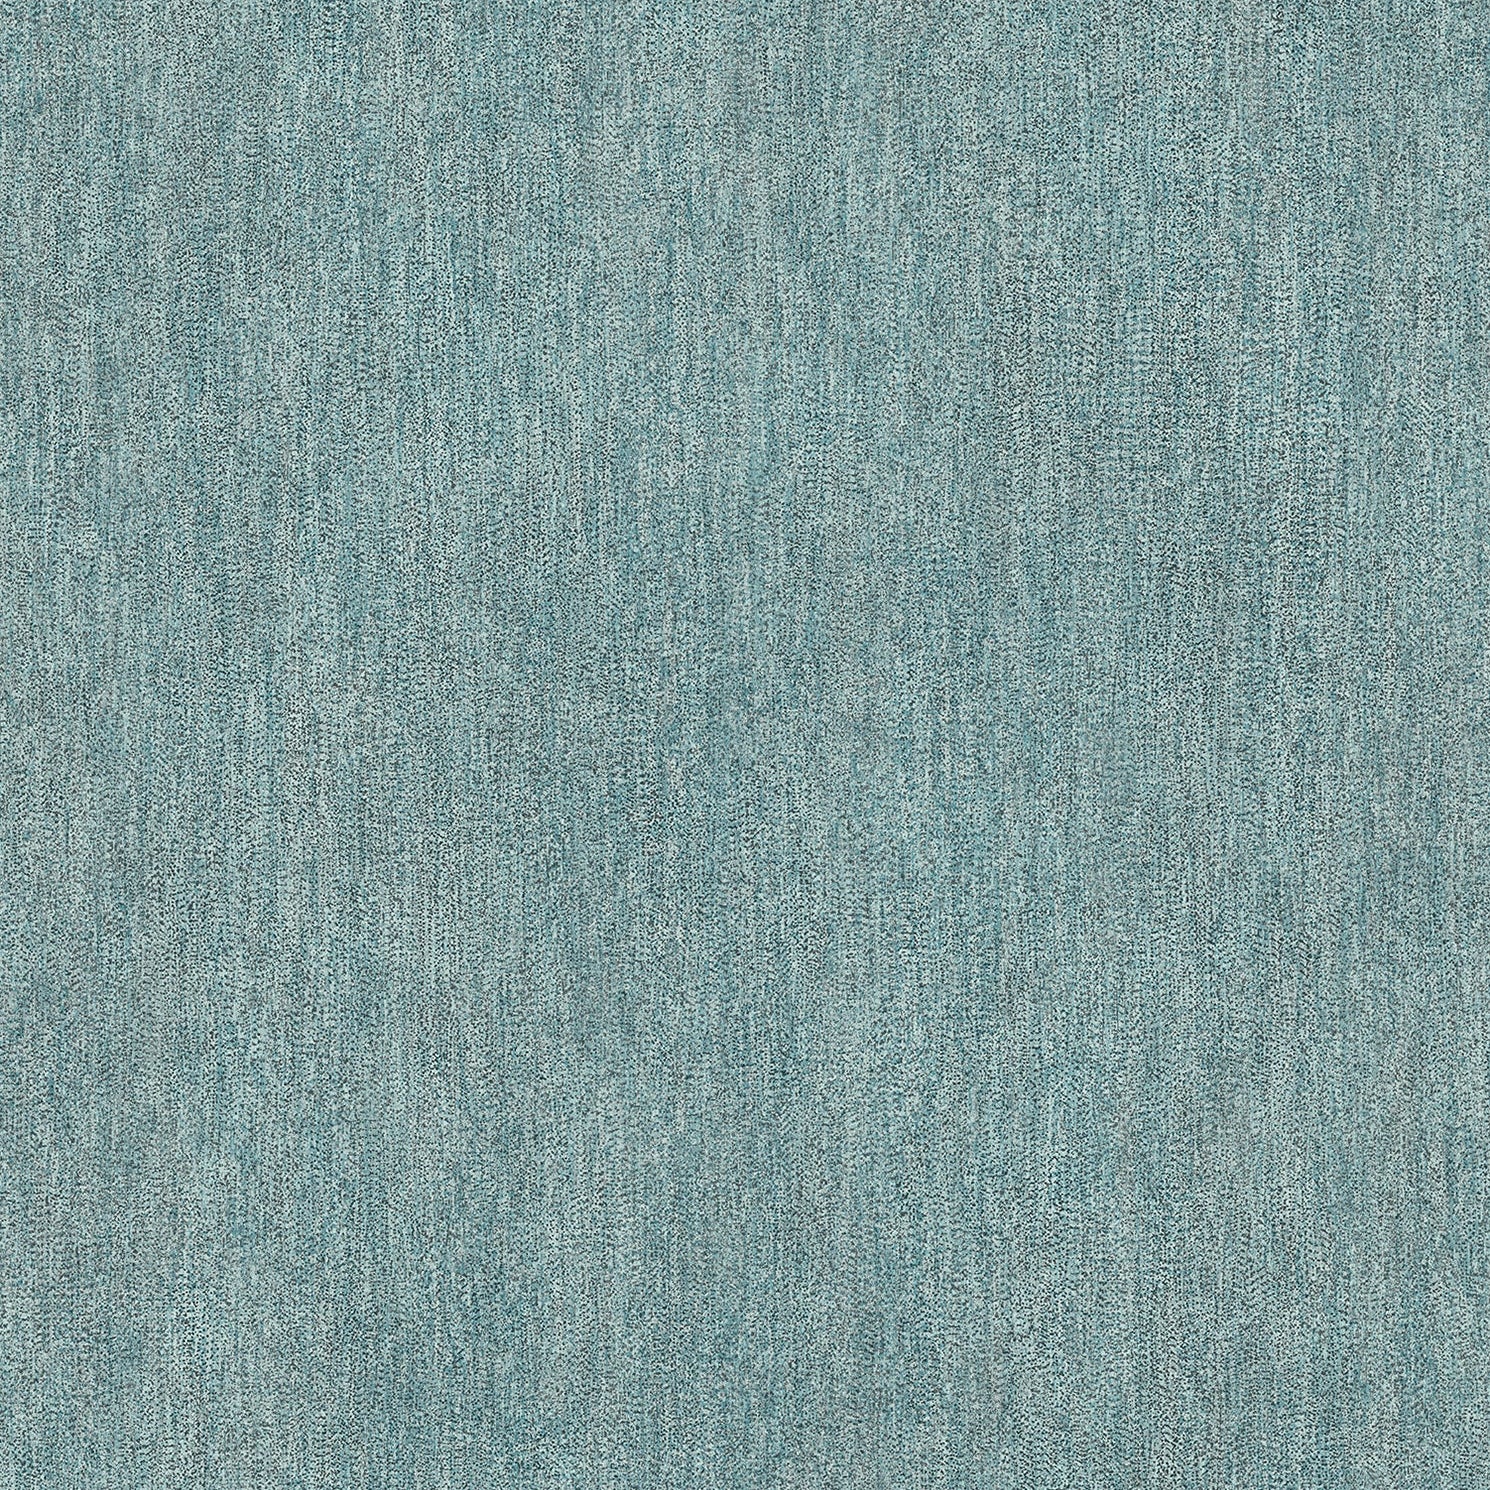 Acquire 4020-09101 Geo & Textures Arlo Teal Speckle Teal by Advantage